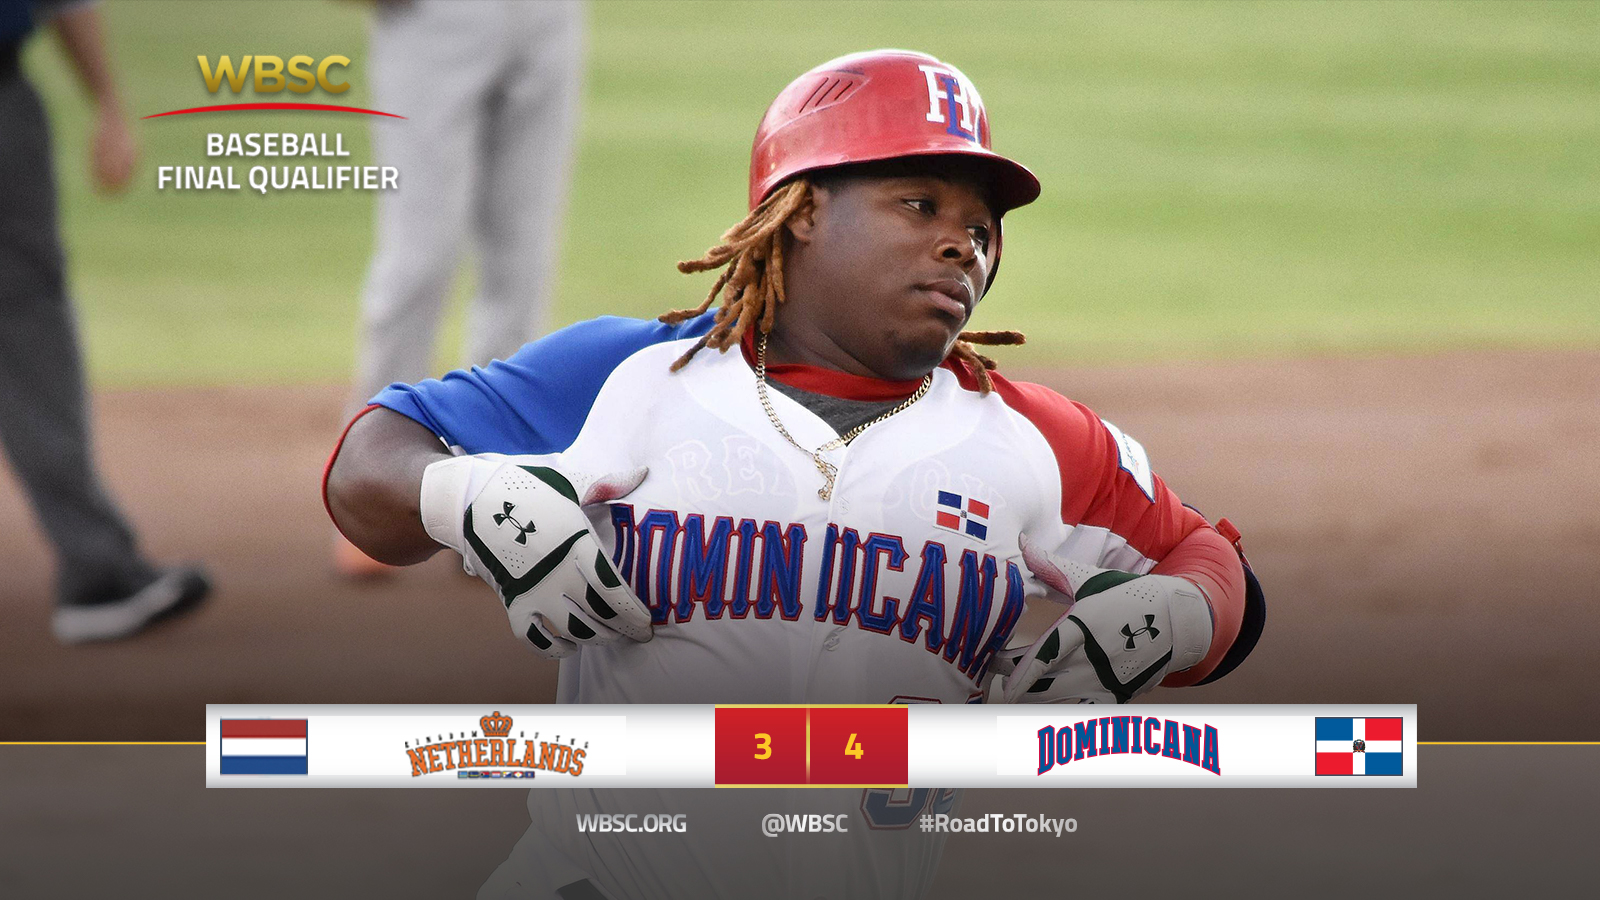 Dominican Republic secured back-to-back wins at the tournament ©WBSC